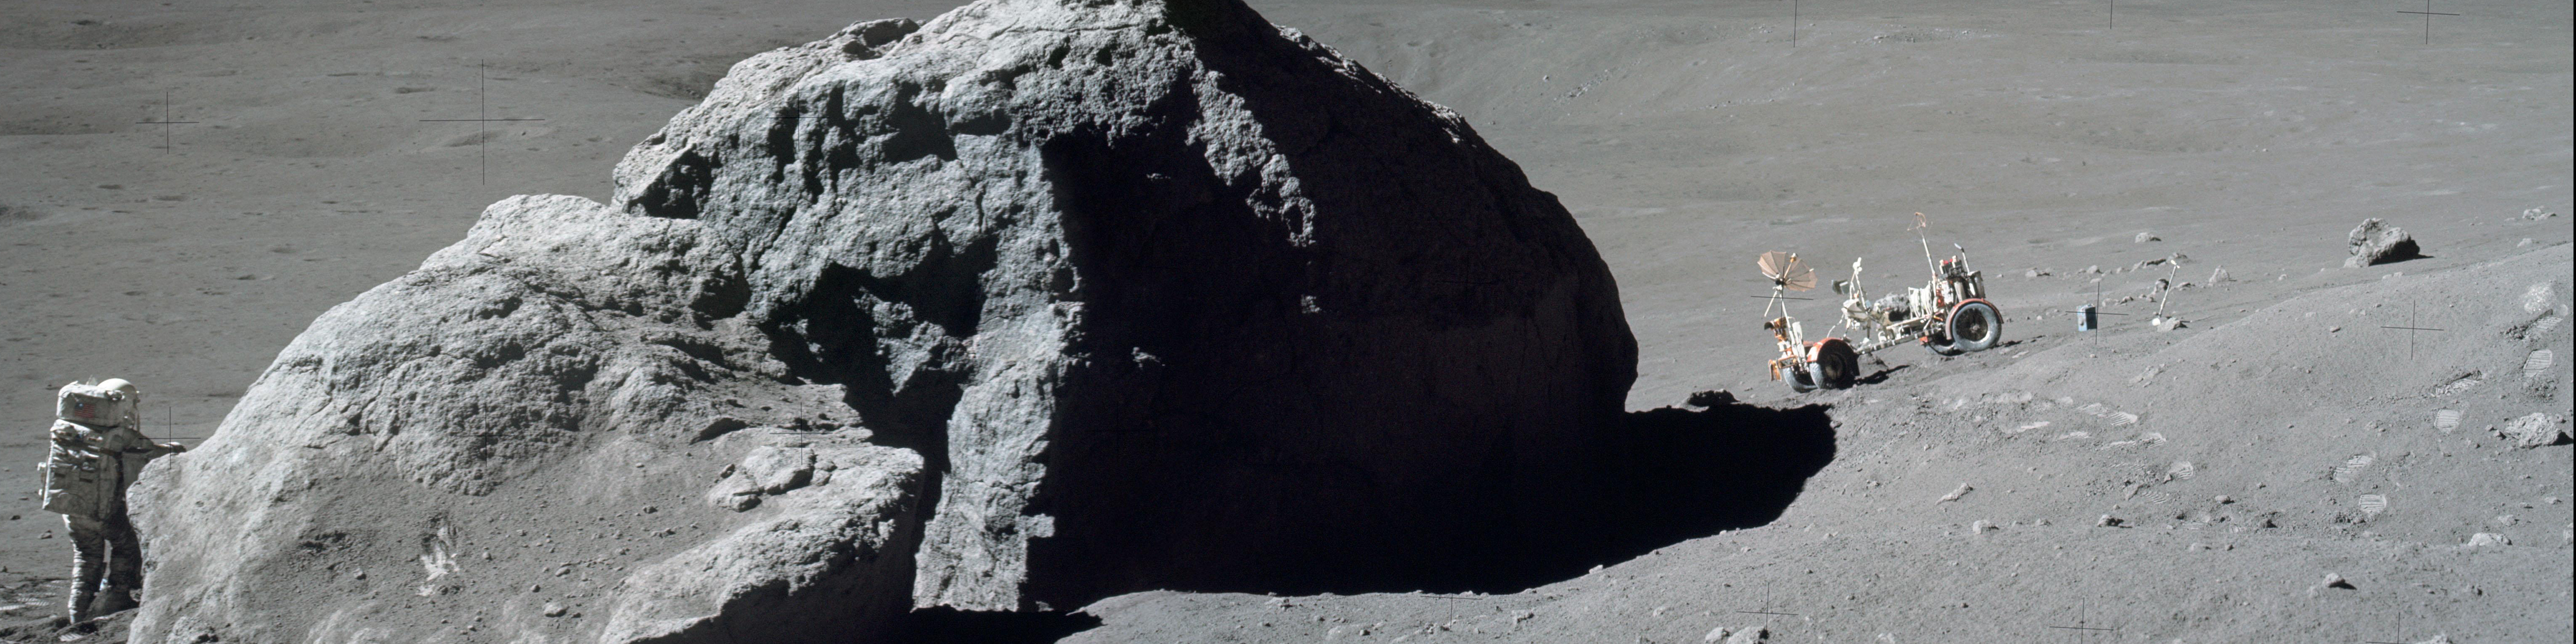 Astronaut walking on the moon, holds onto a massive boulder, while his rover waits on the other side of the rock